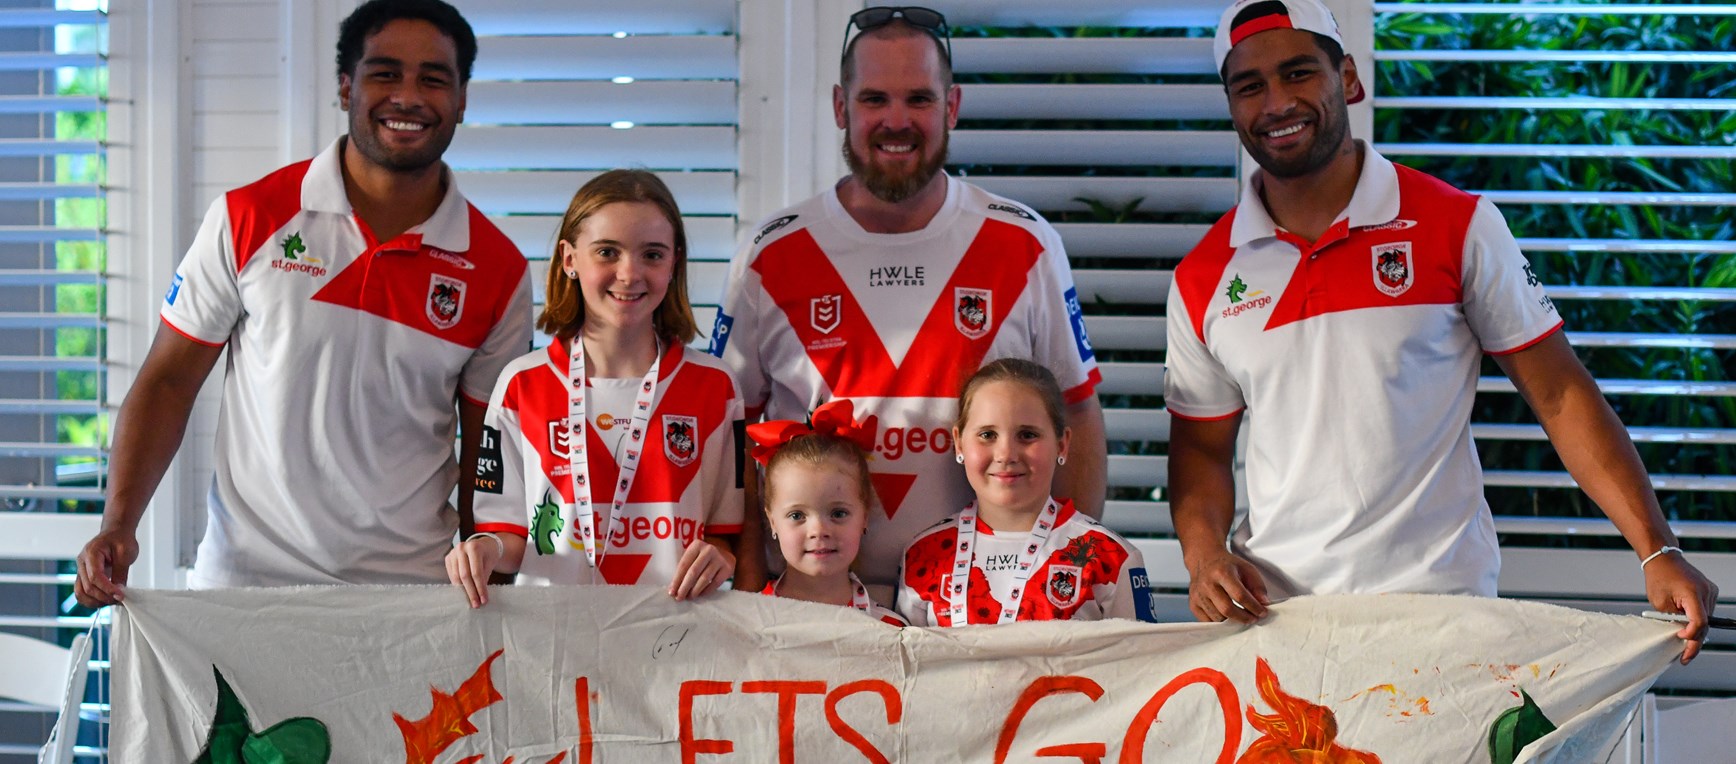 Gallery: Townsville member event